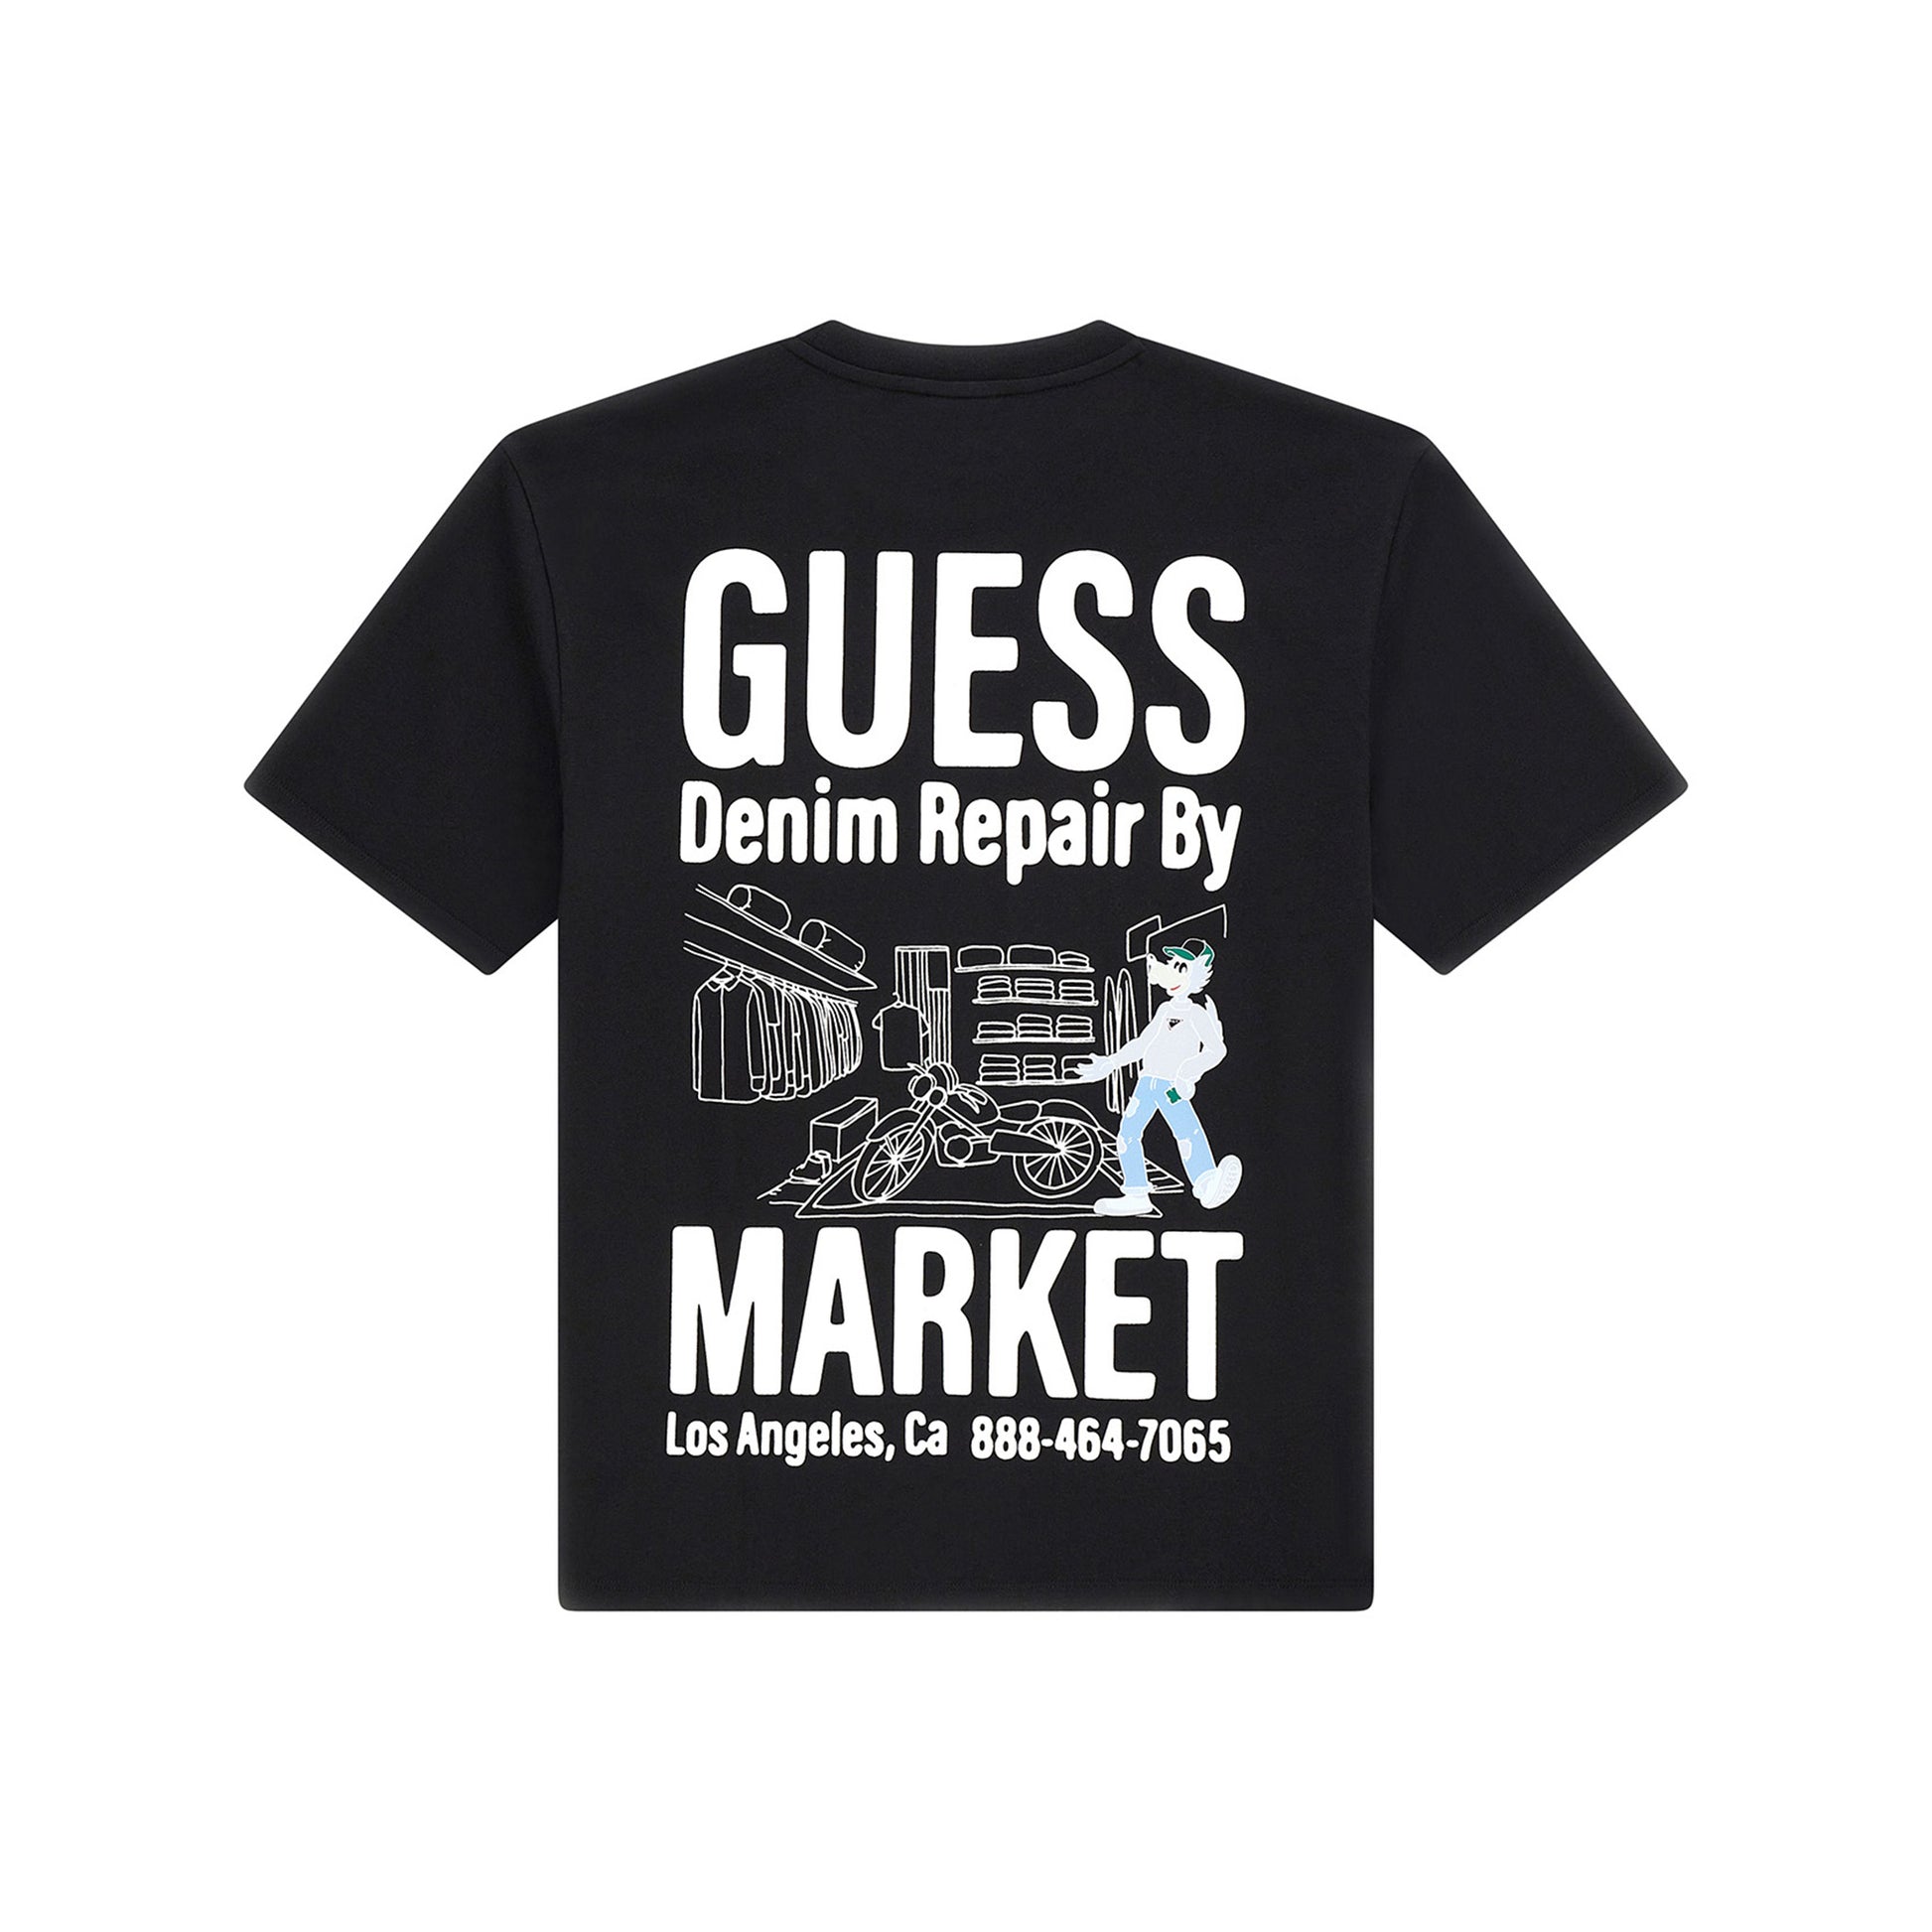 MARKET clothing brand GO MARKET SHOP TEE. Find more graphic tees, hats, hoodies and more at MarketStudios.com. Formally Chinatown Market